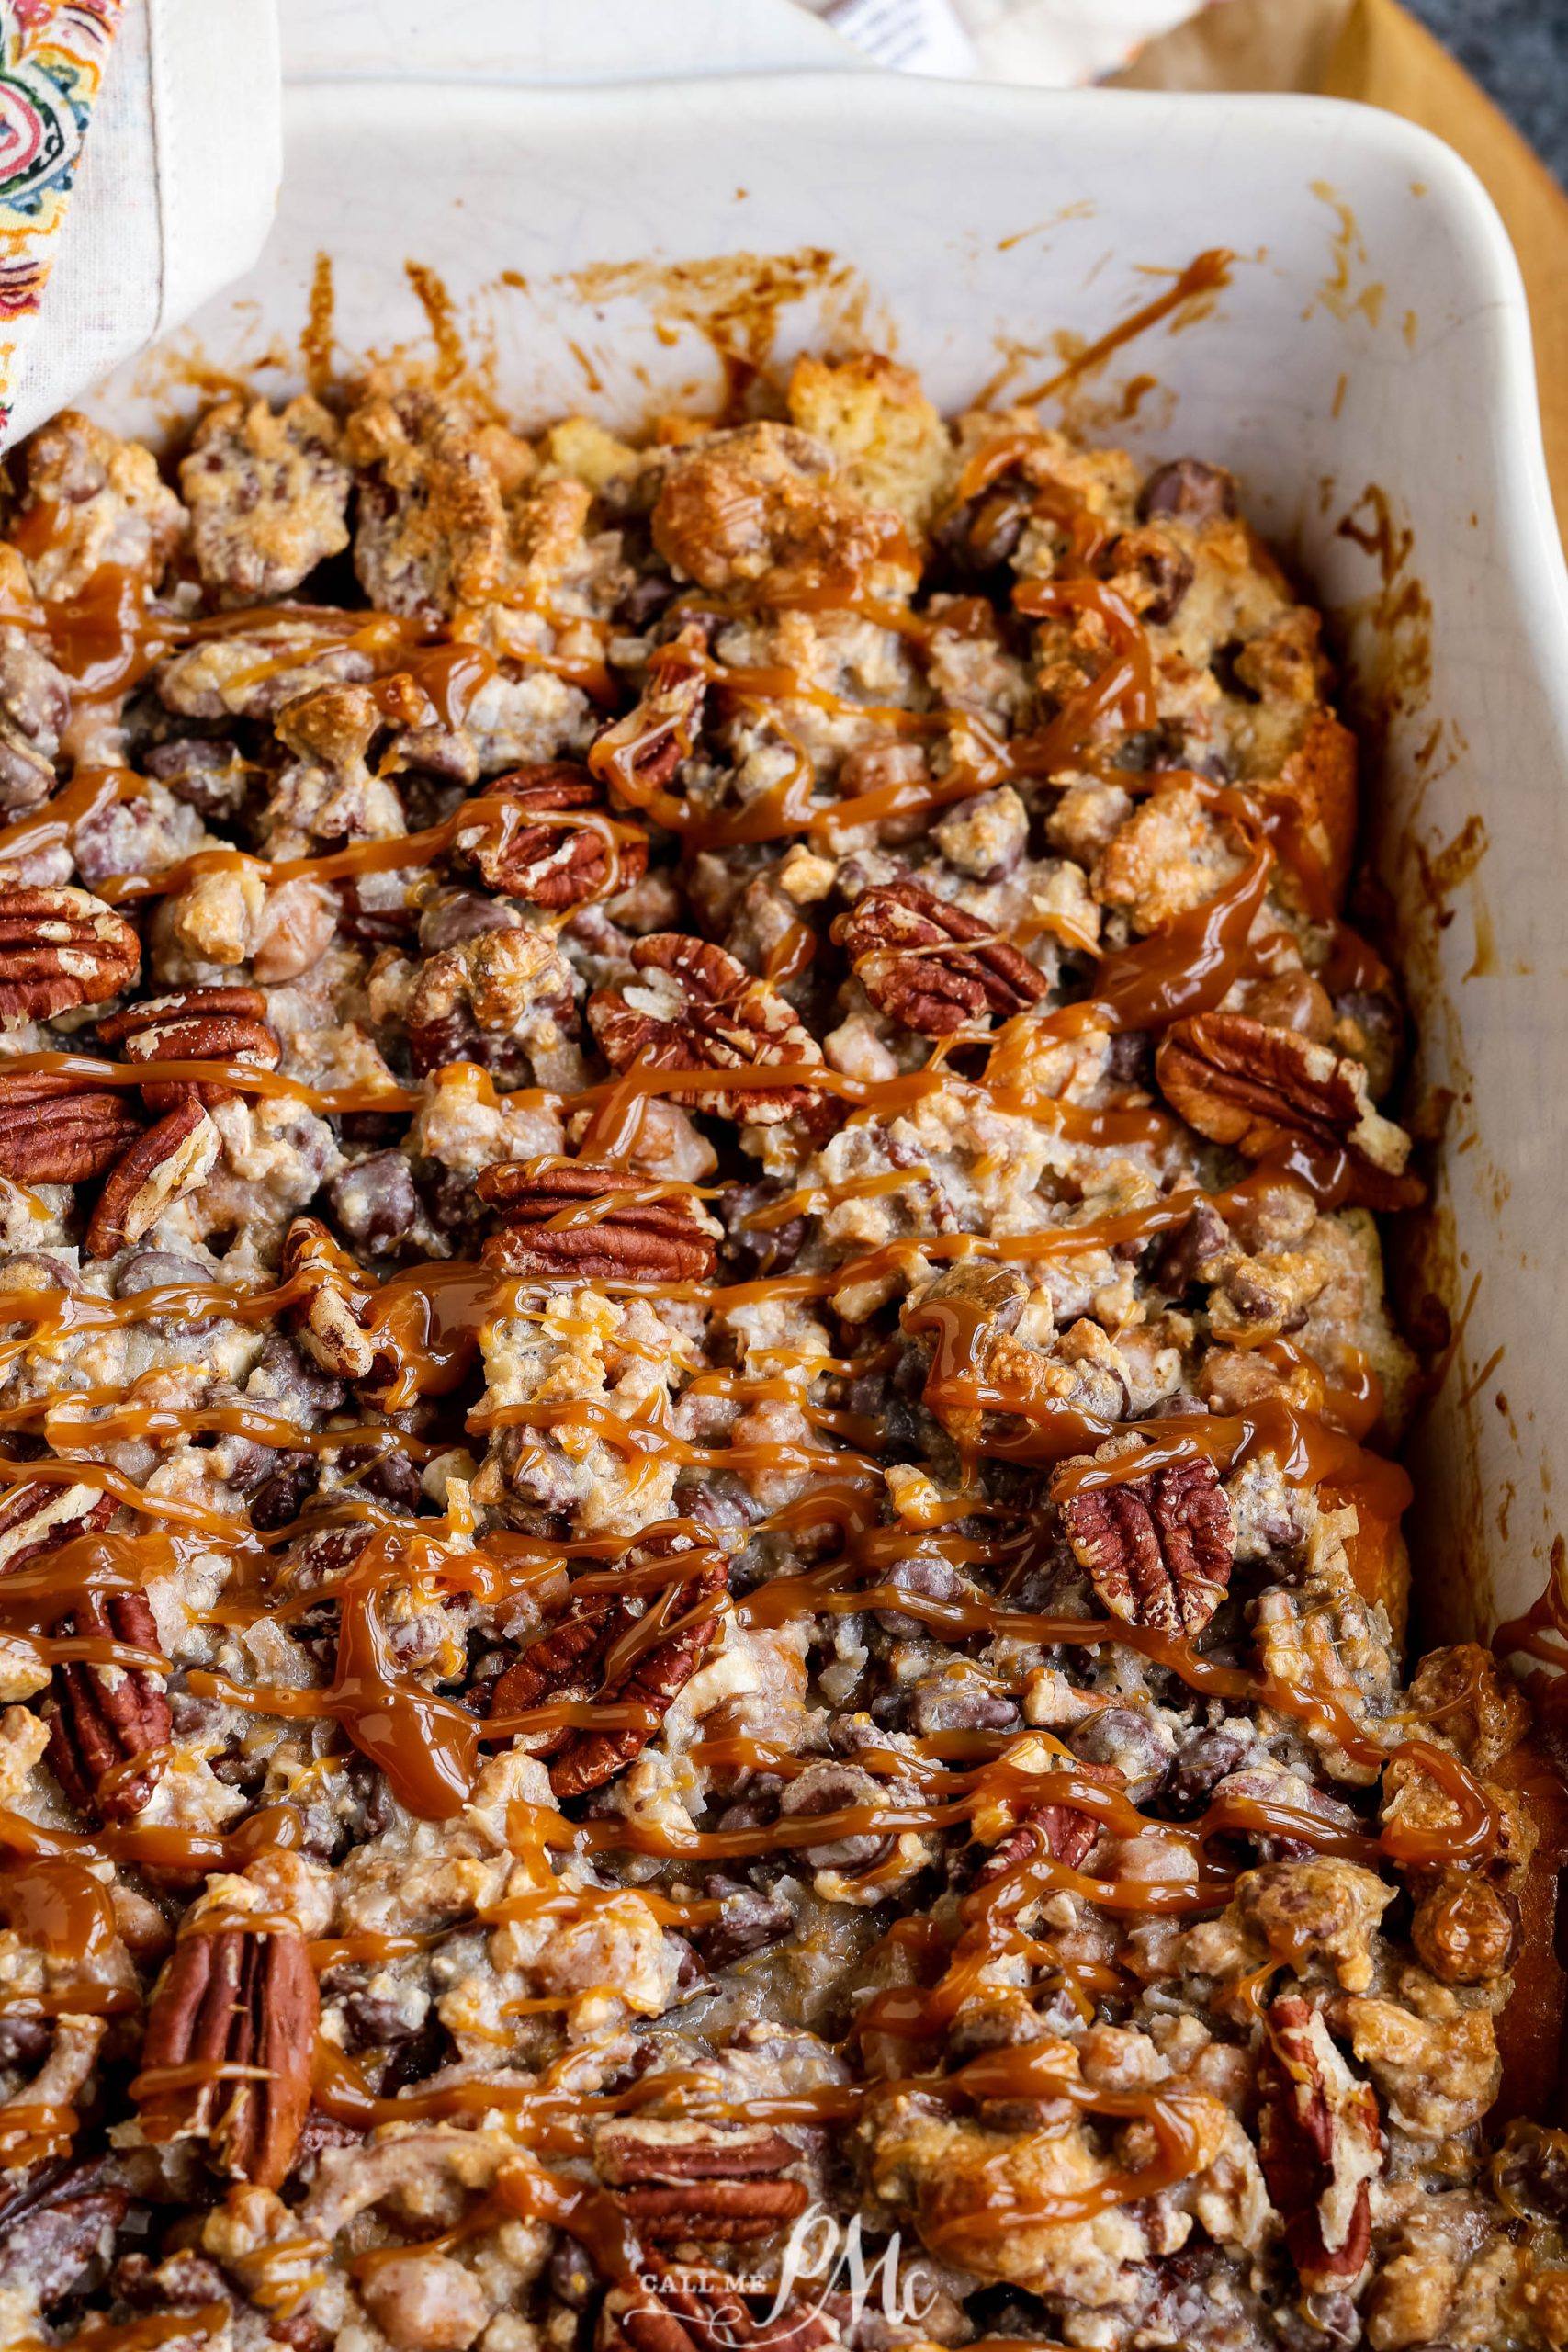 Nuts and pecans on a dessert.